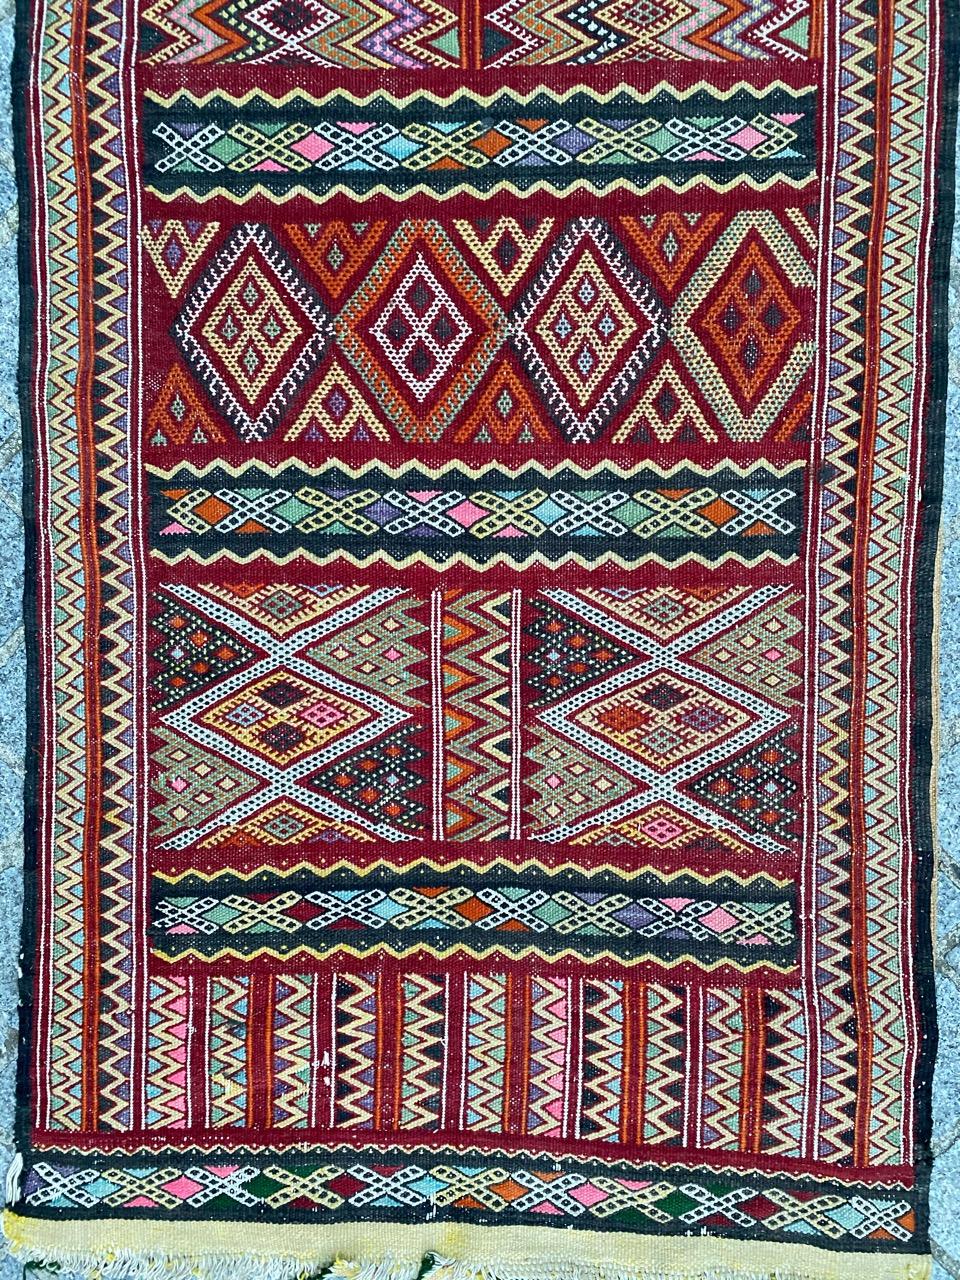 Beautiful colorful long Moroccan Kilim with nice tribal geometrical design and beautiful colors, entirely handwoven with wool on cotton foundation.

✨✨✨
